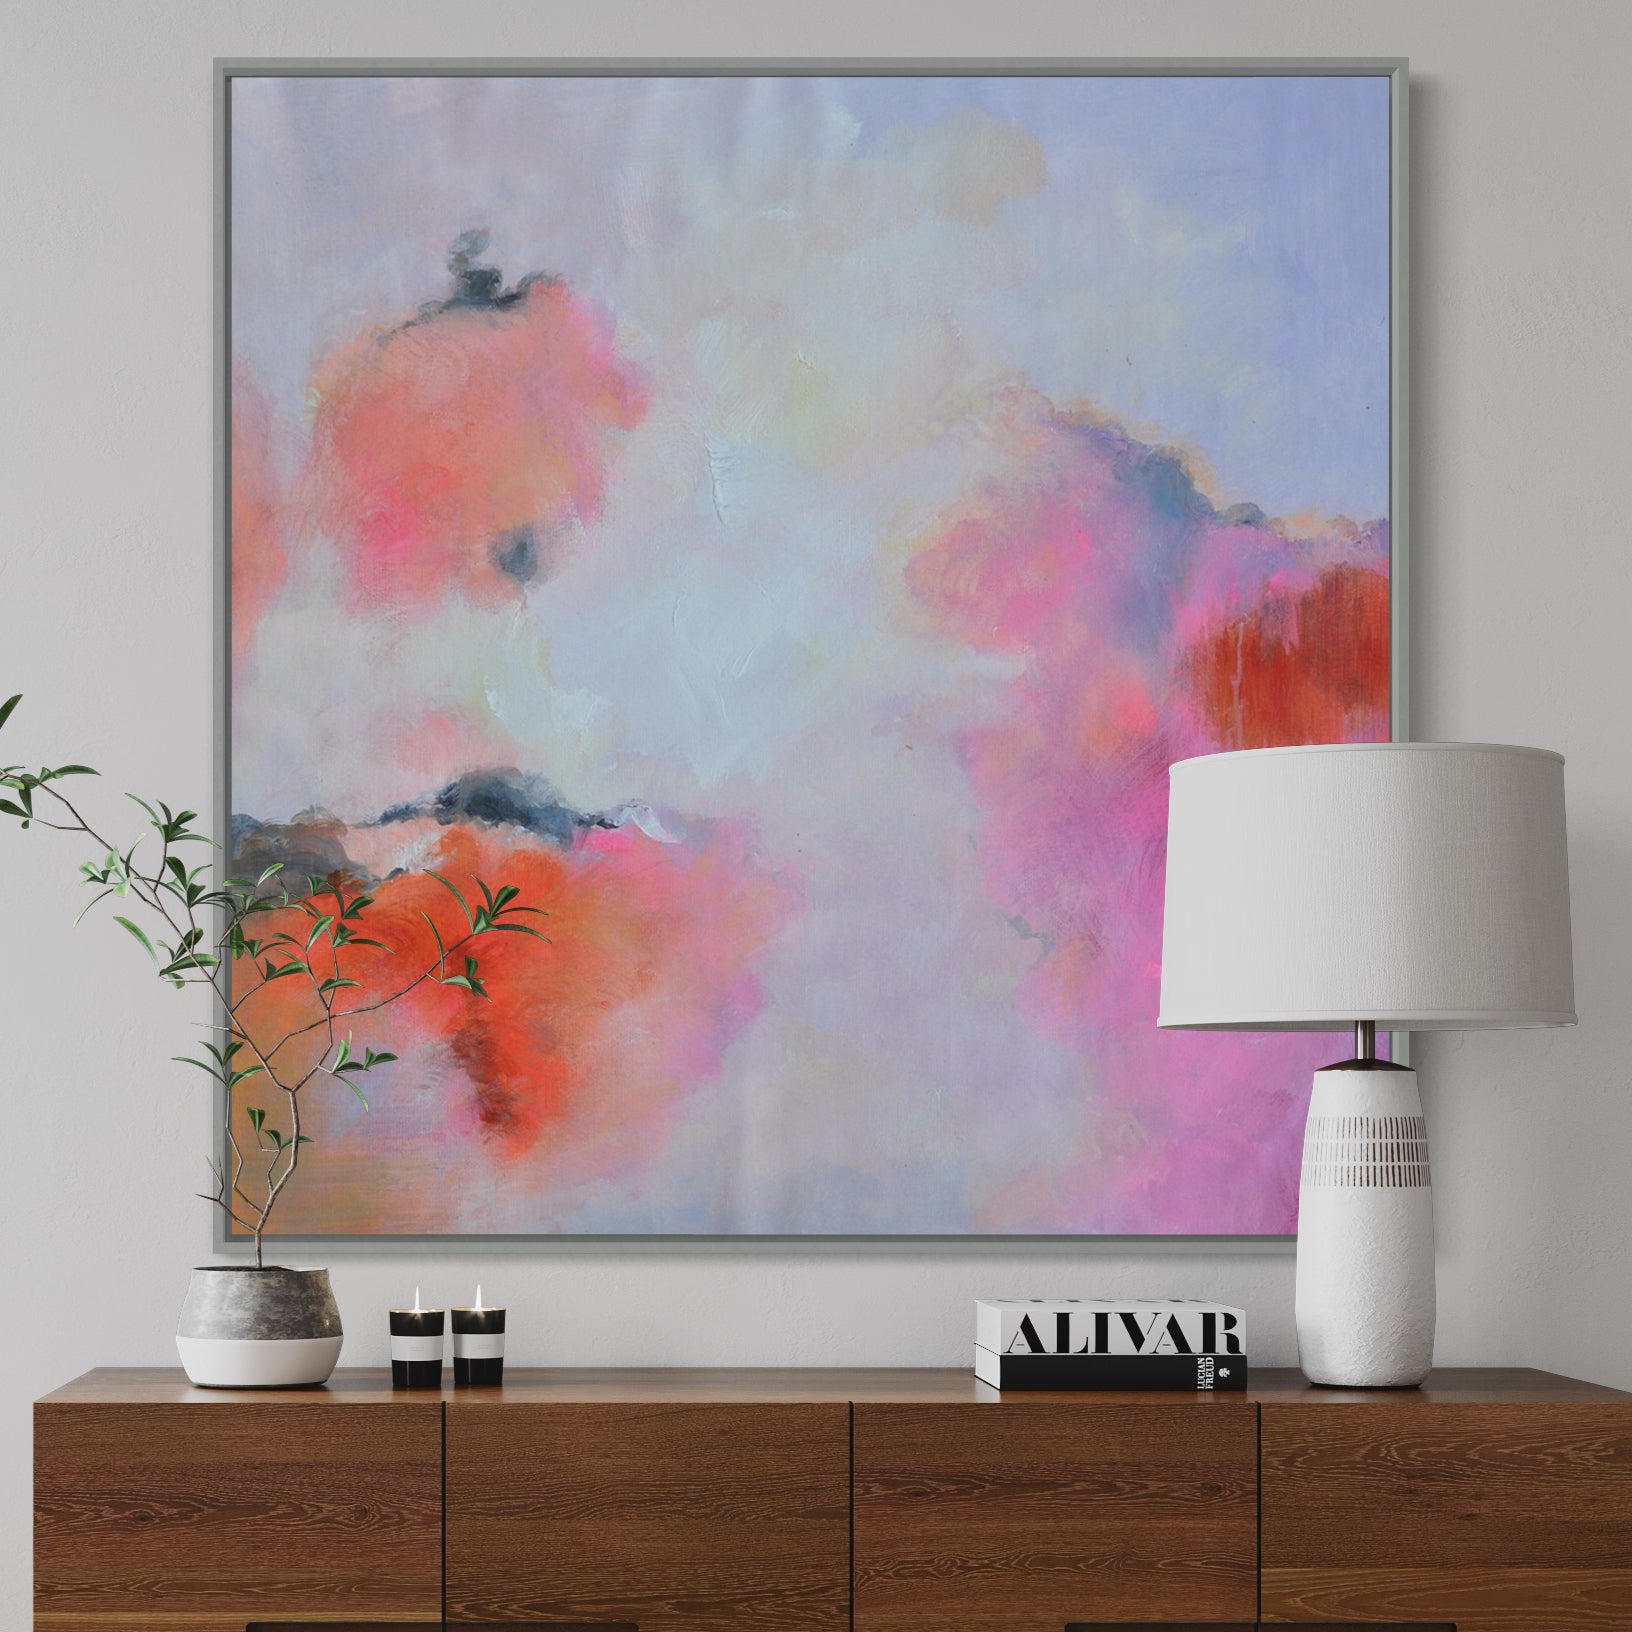 Cotton Candy, Gallery Wrap (With Bleed) / 70x70cm